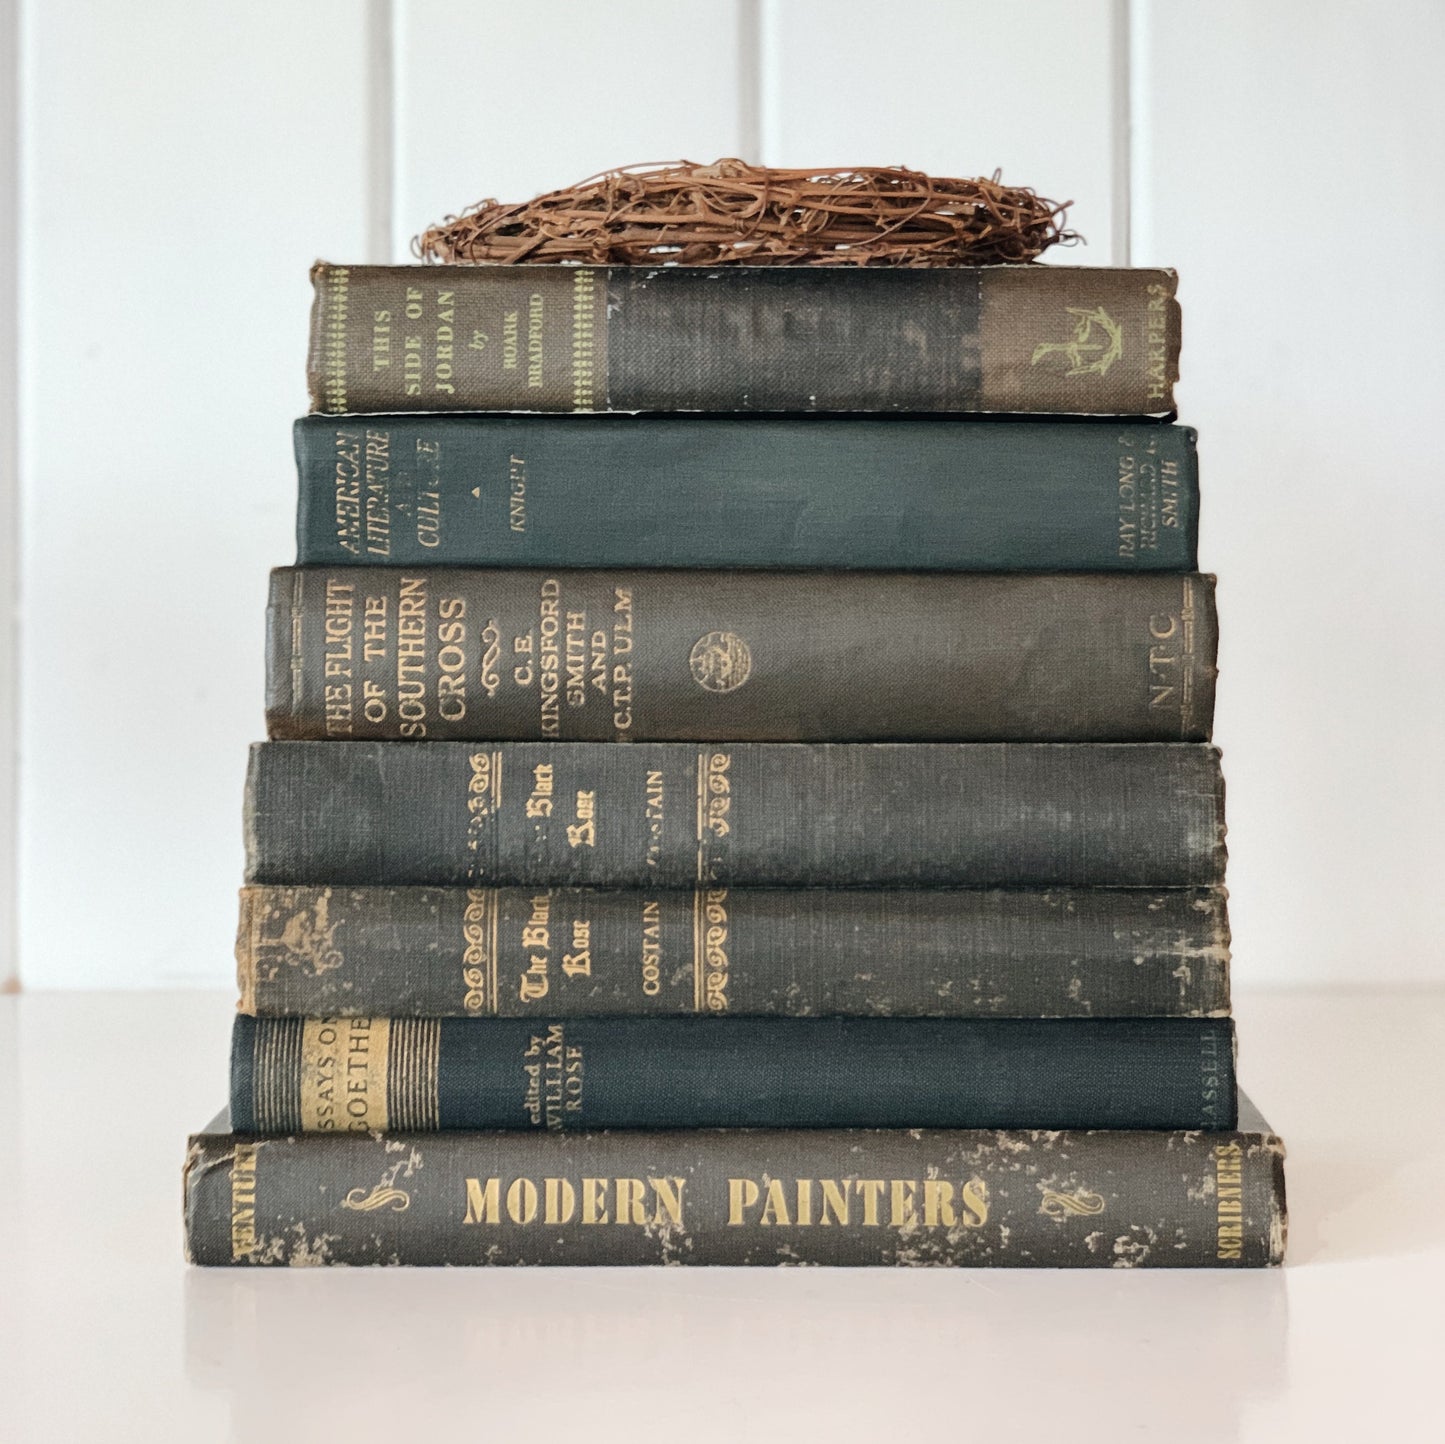 Vintage Faded Cozy Black and Gold Books for Decor, Shabby Books for Decor